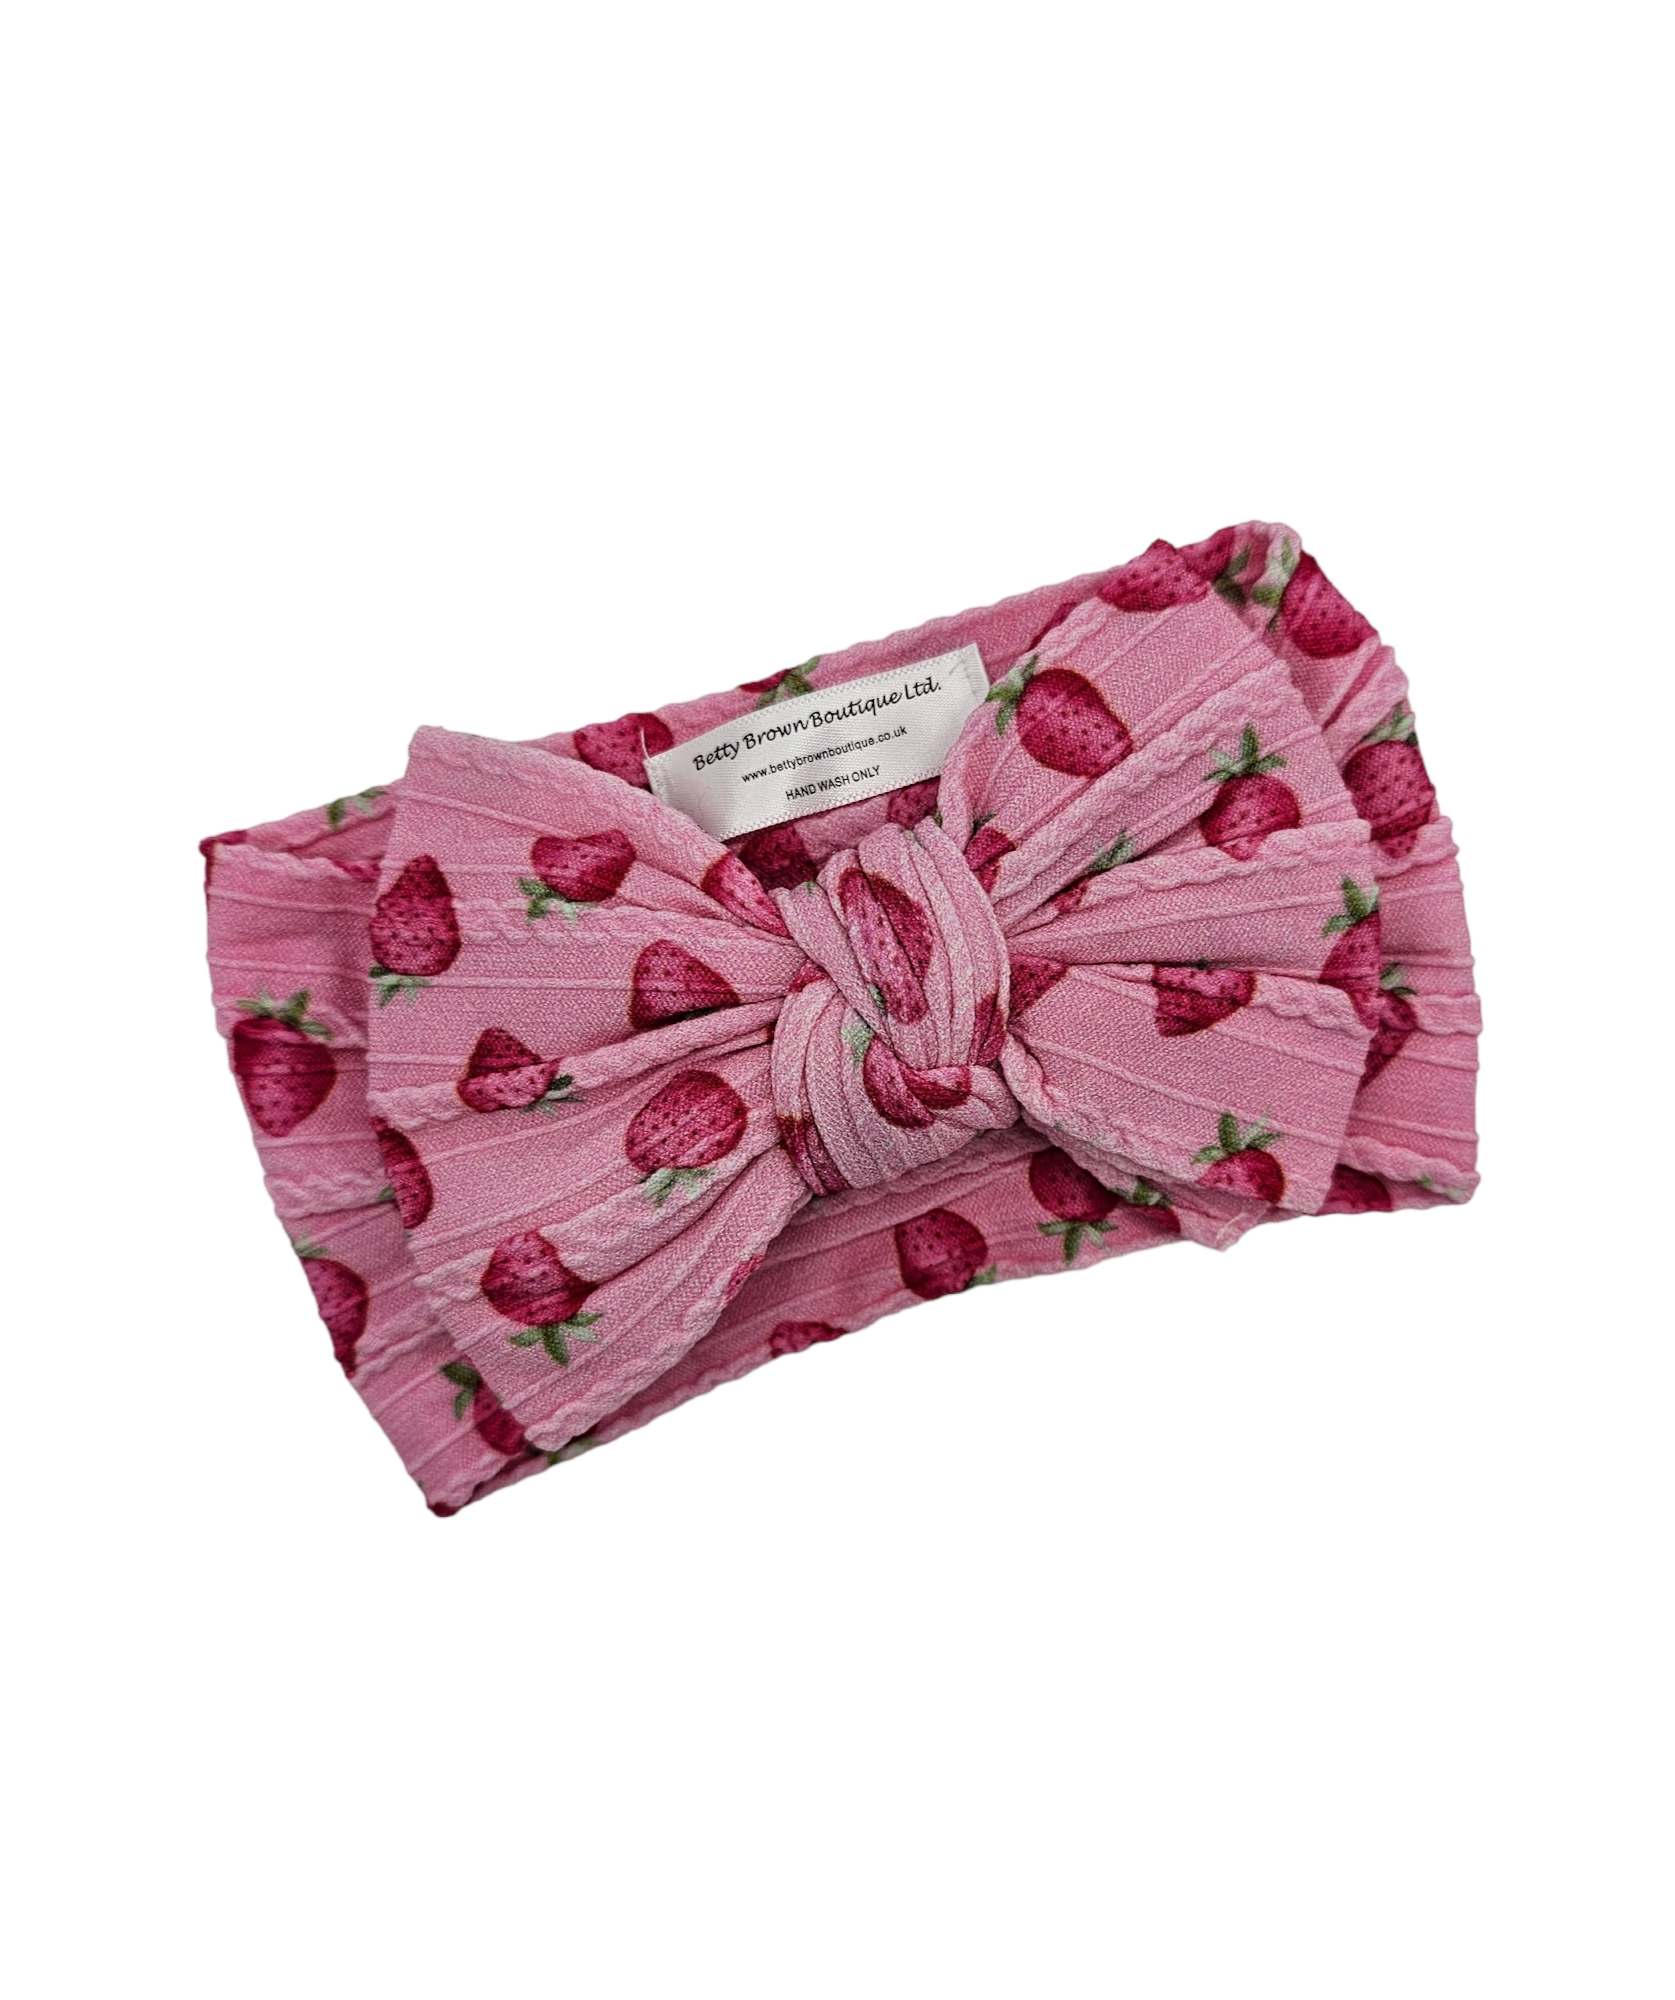 Pink Strawberry Print Larger Bow Cable Knit Headwrap - Betty Brown Boutique Ltd